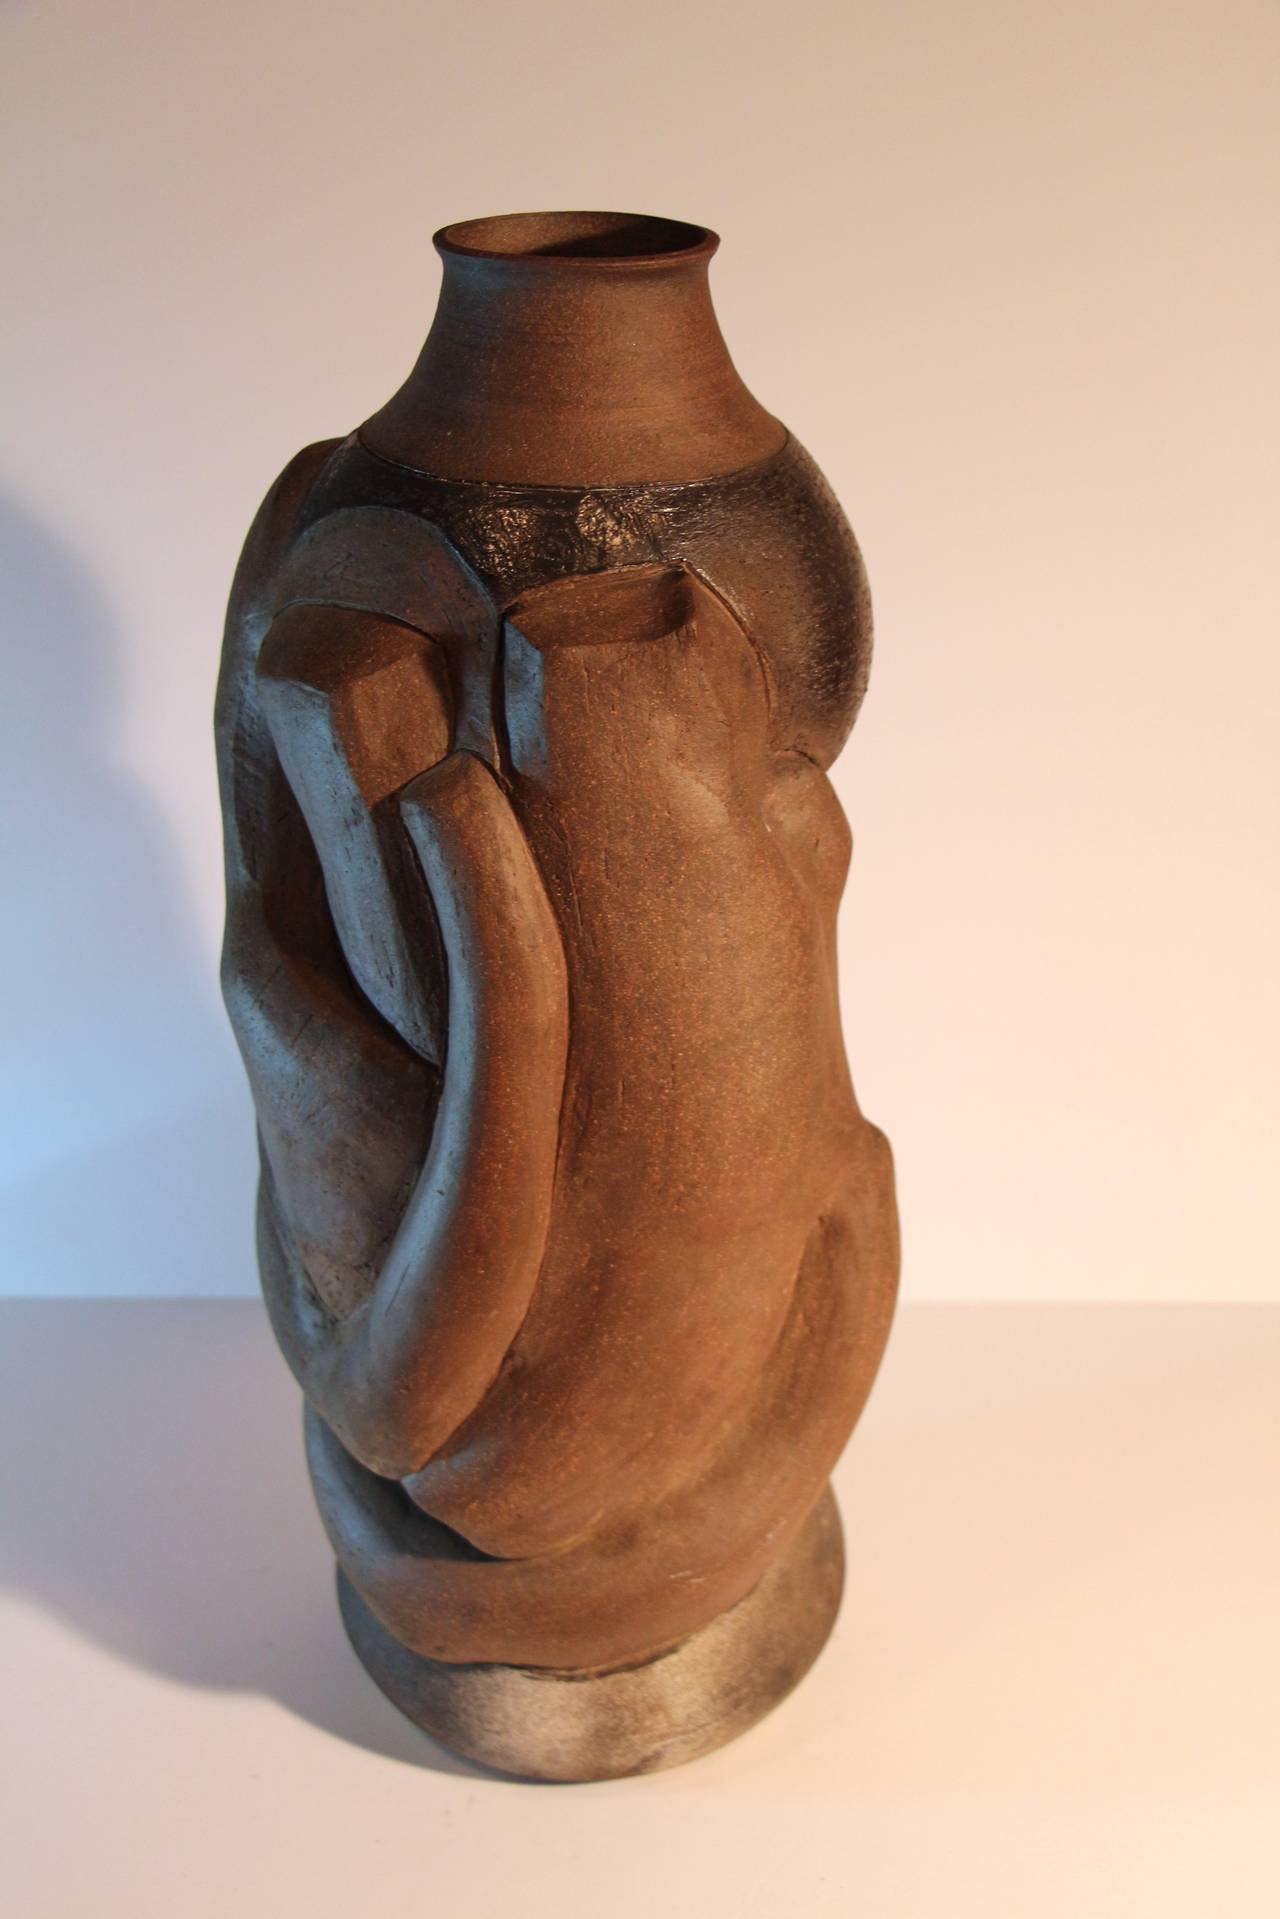 An impressive and large intricate stoneware sculpture. Great form and great size. It will make a statement in any room.